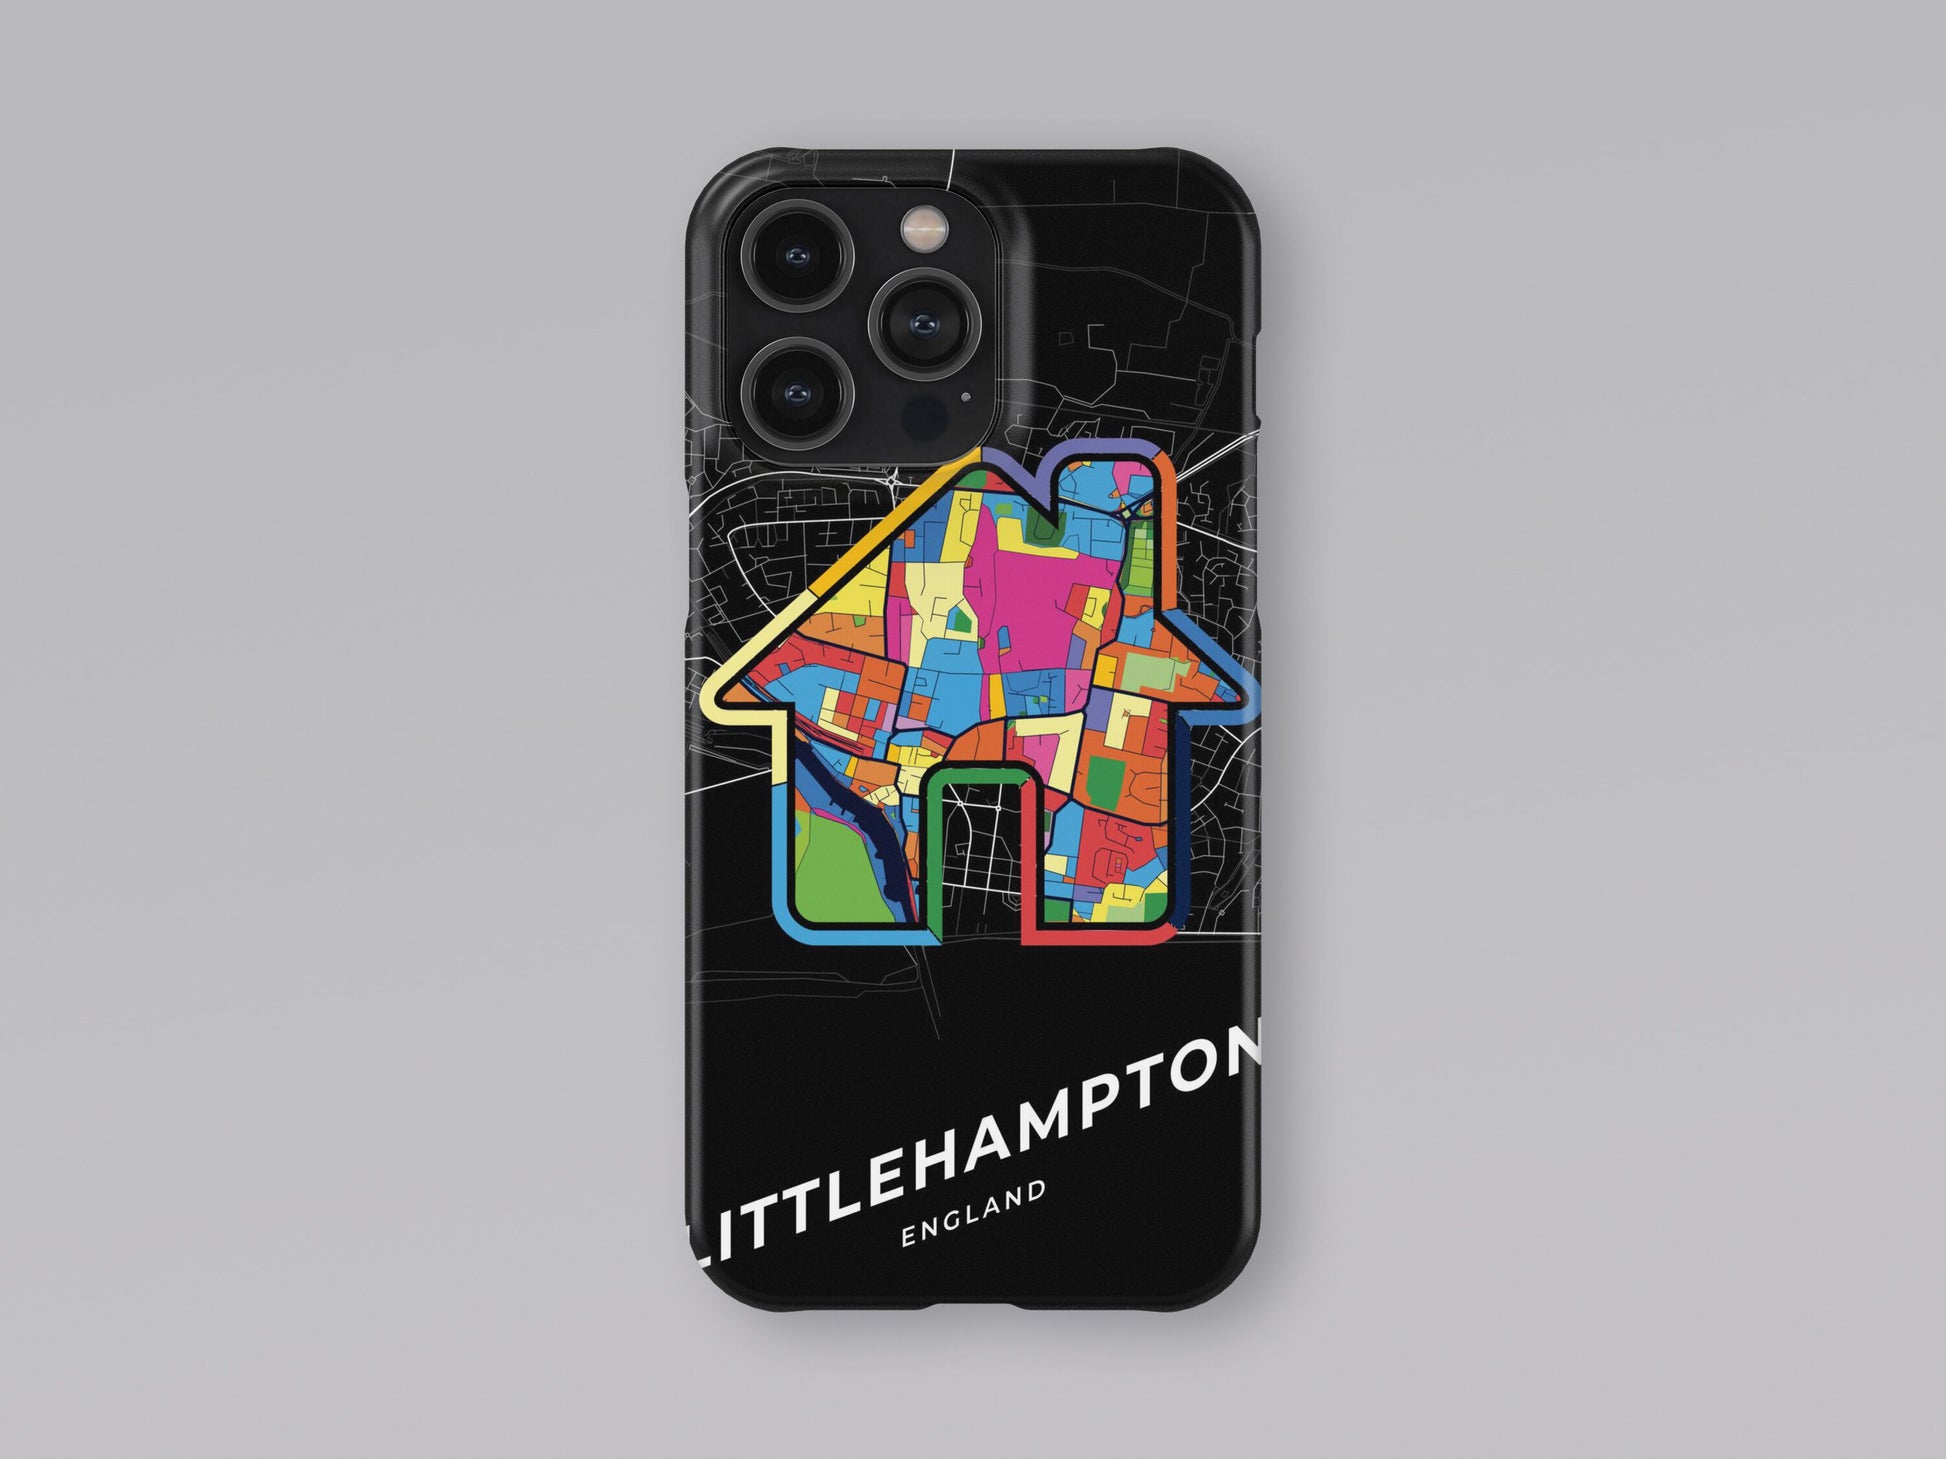 Littlehampton England slim phone case with colorful icon. Birthday, wedding or housewarming gift. Couple match cases. 3